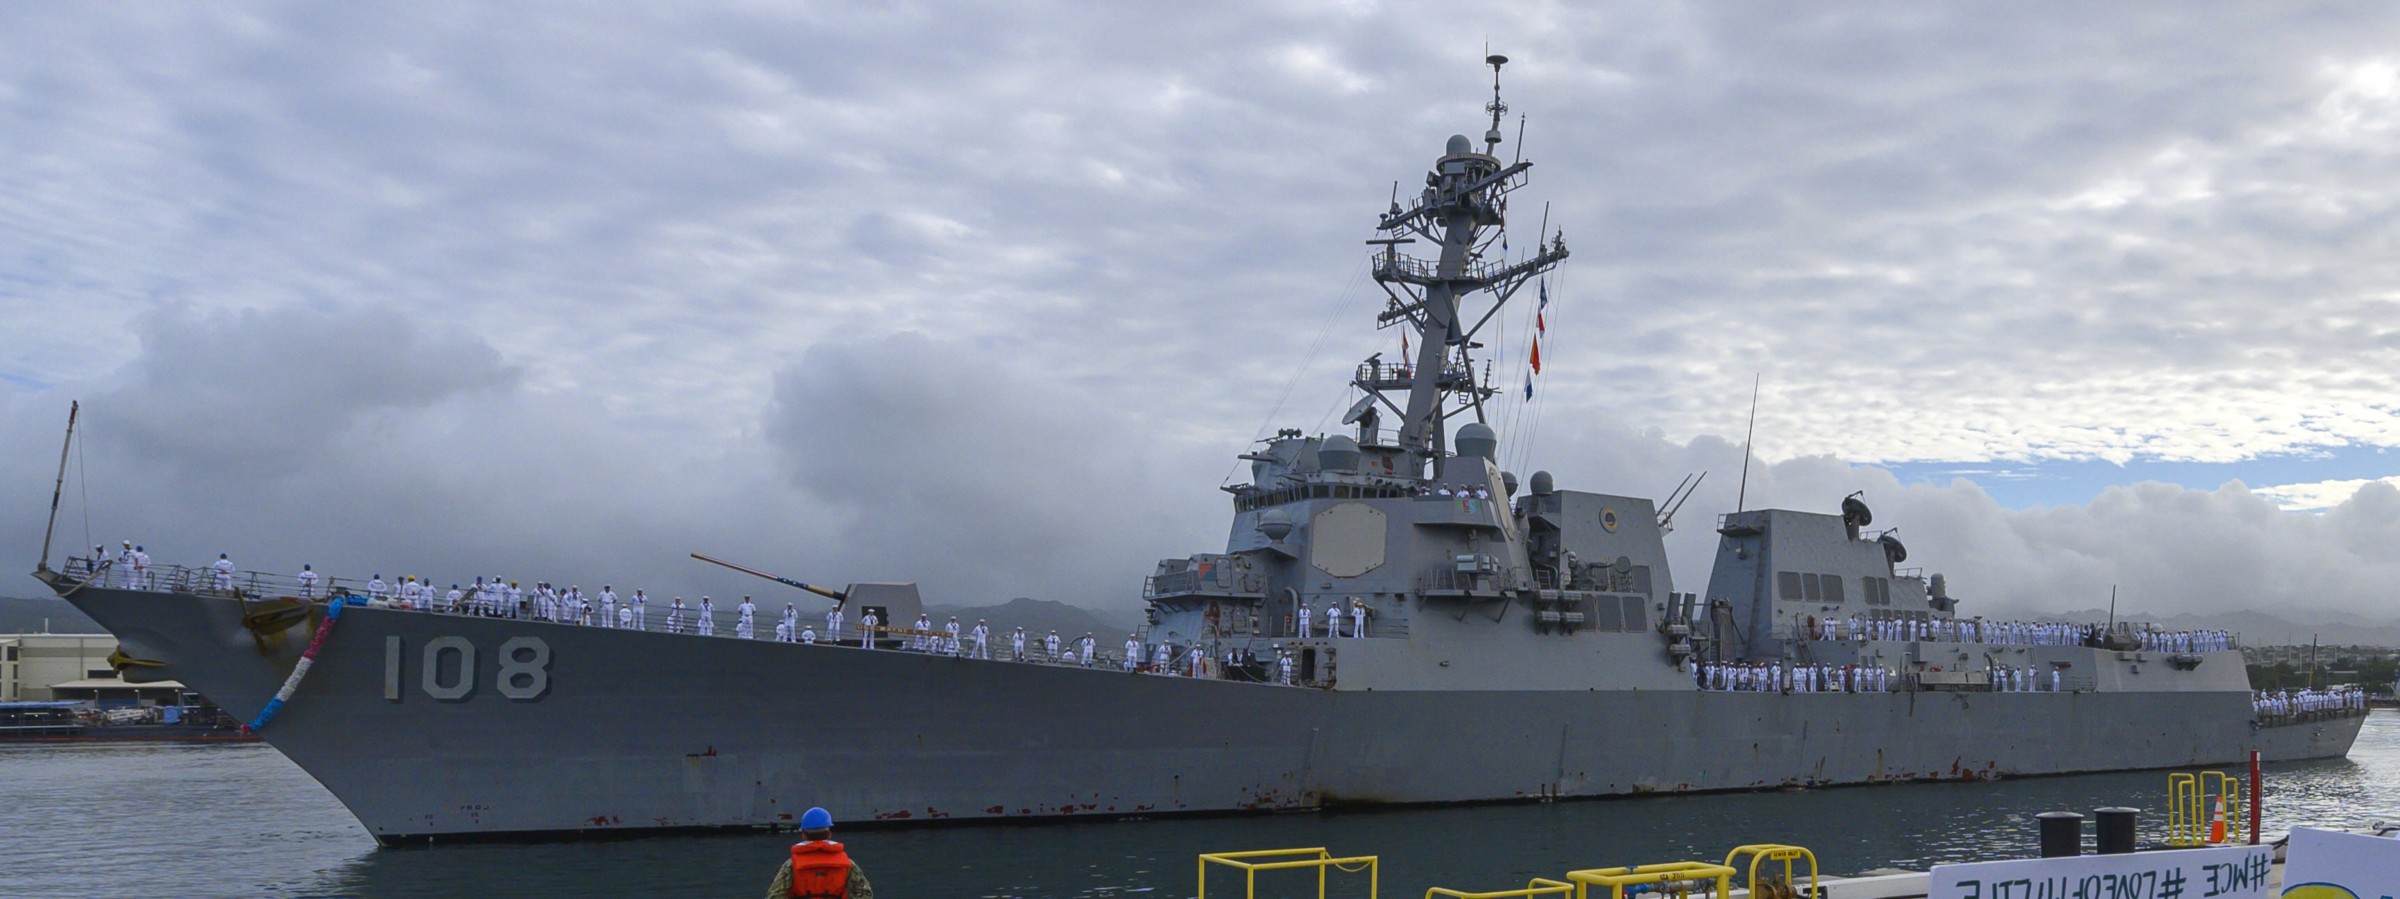 ddg-108 uss wayne e. meyer arleigh burke class guided missile destroyer aegis us navy joint base pearl harbor hickam hawaii 64